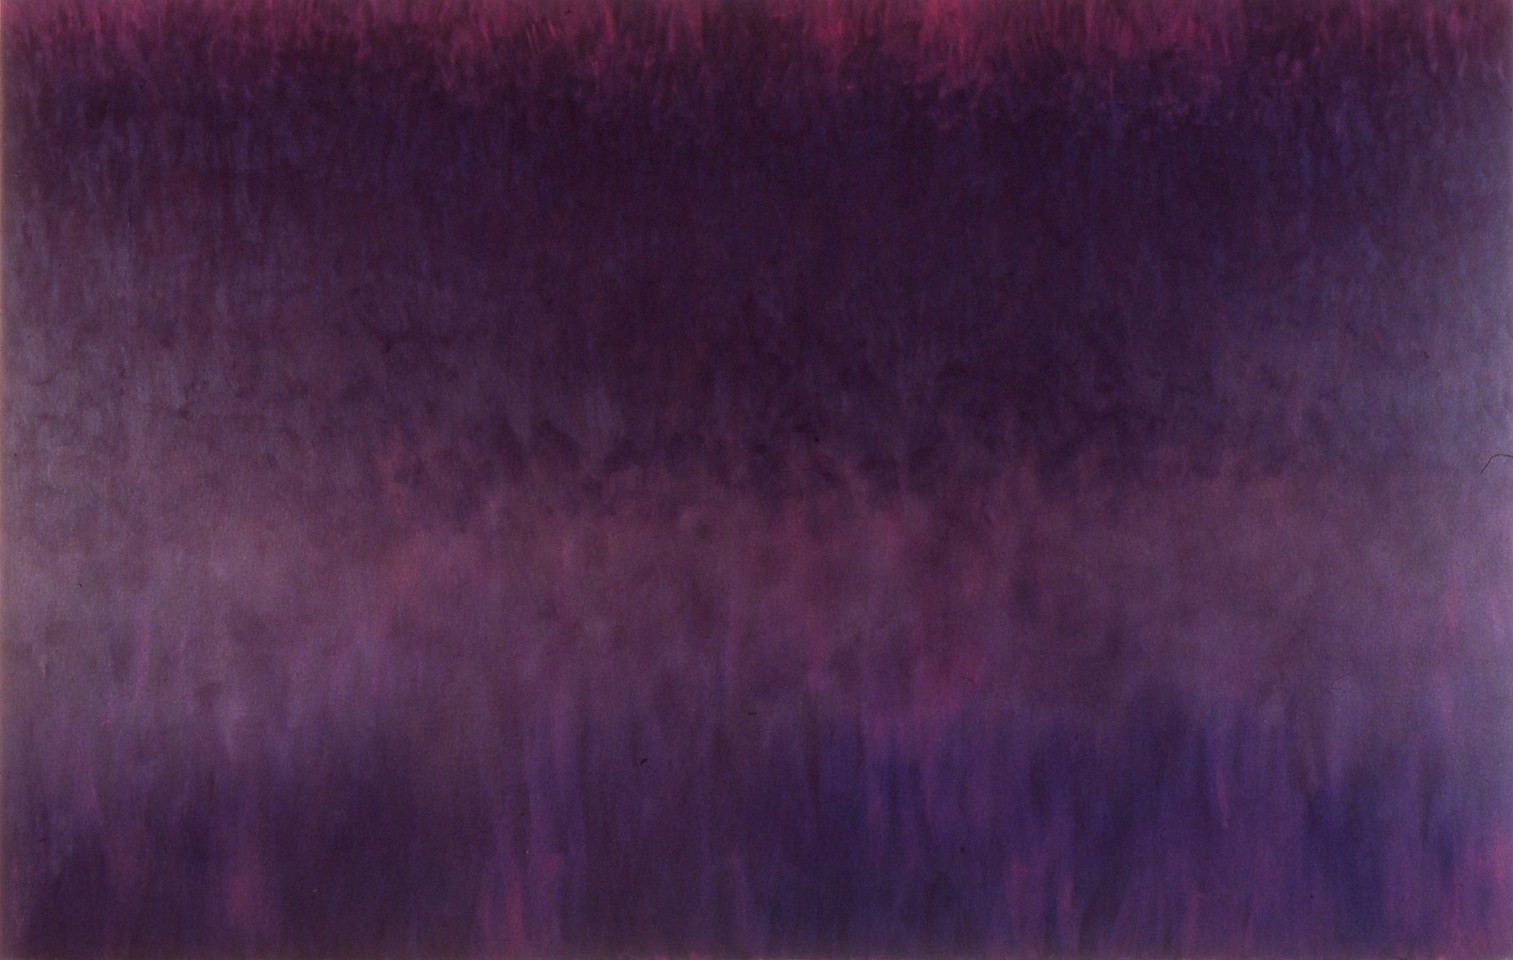 Janet Rogers, Night Fire, 1989
Oil Encaustic on Canvas, 51 x 81 in.
ROGE00075